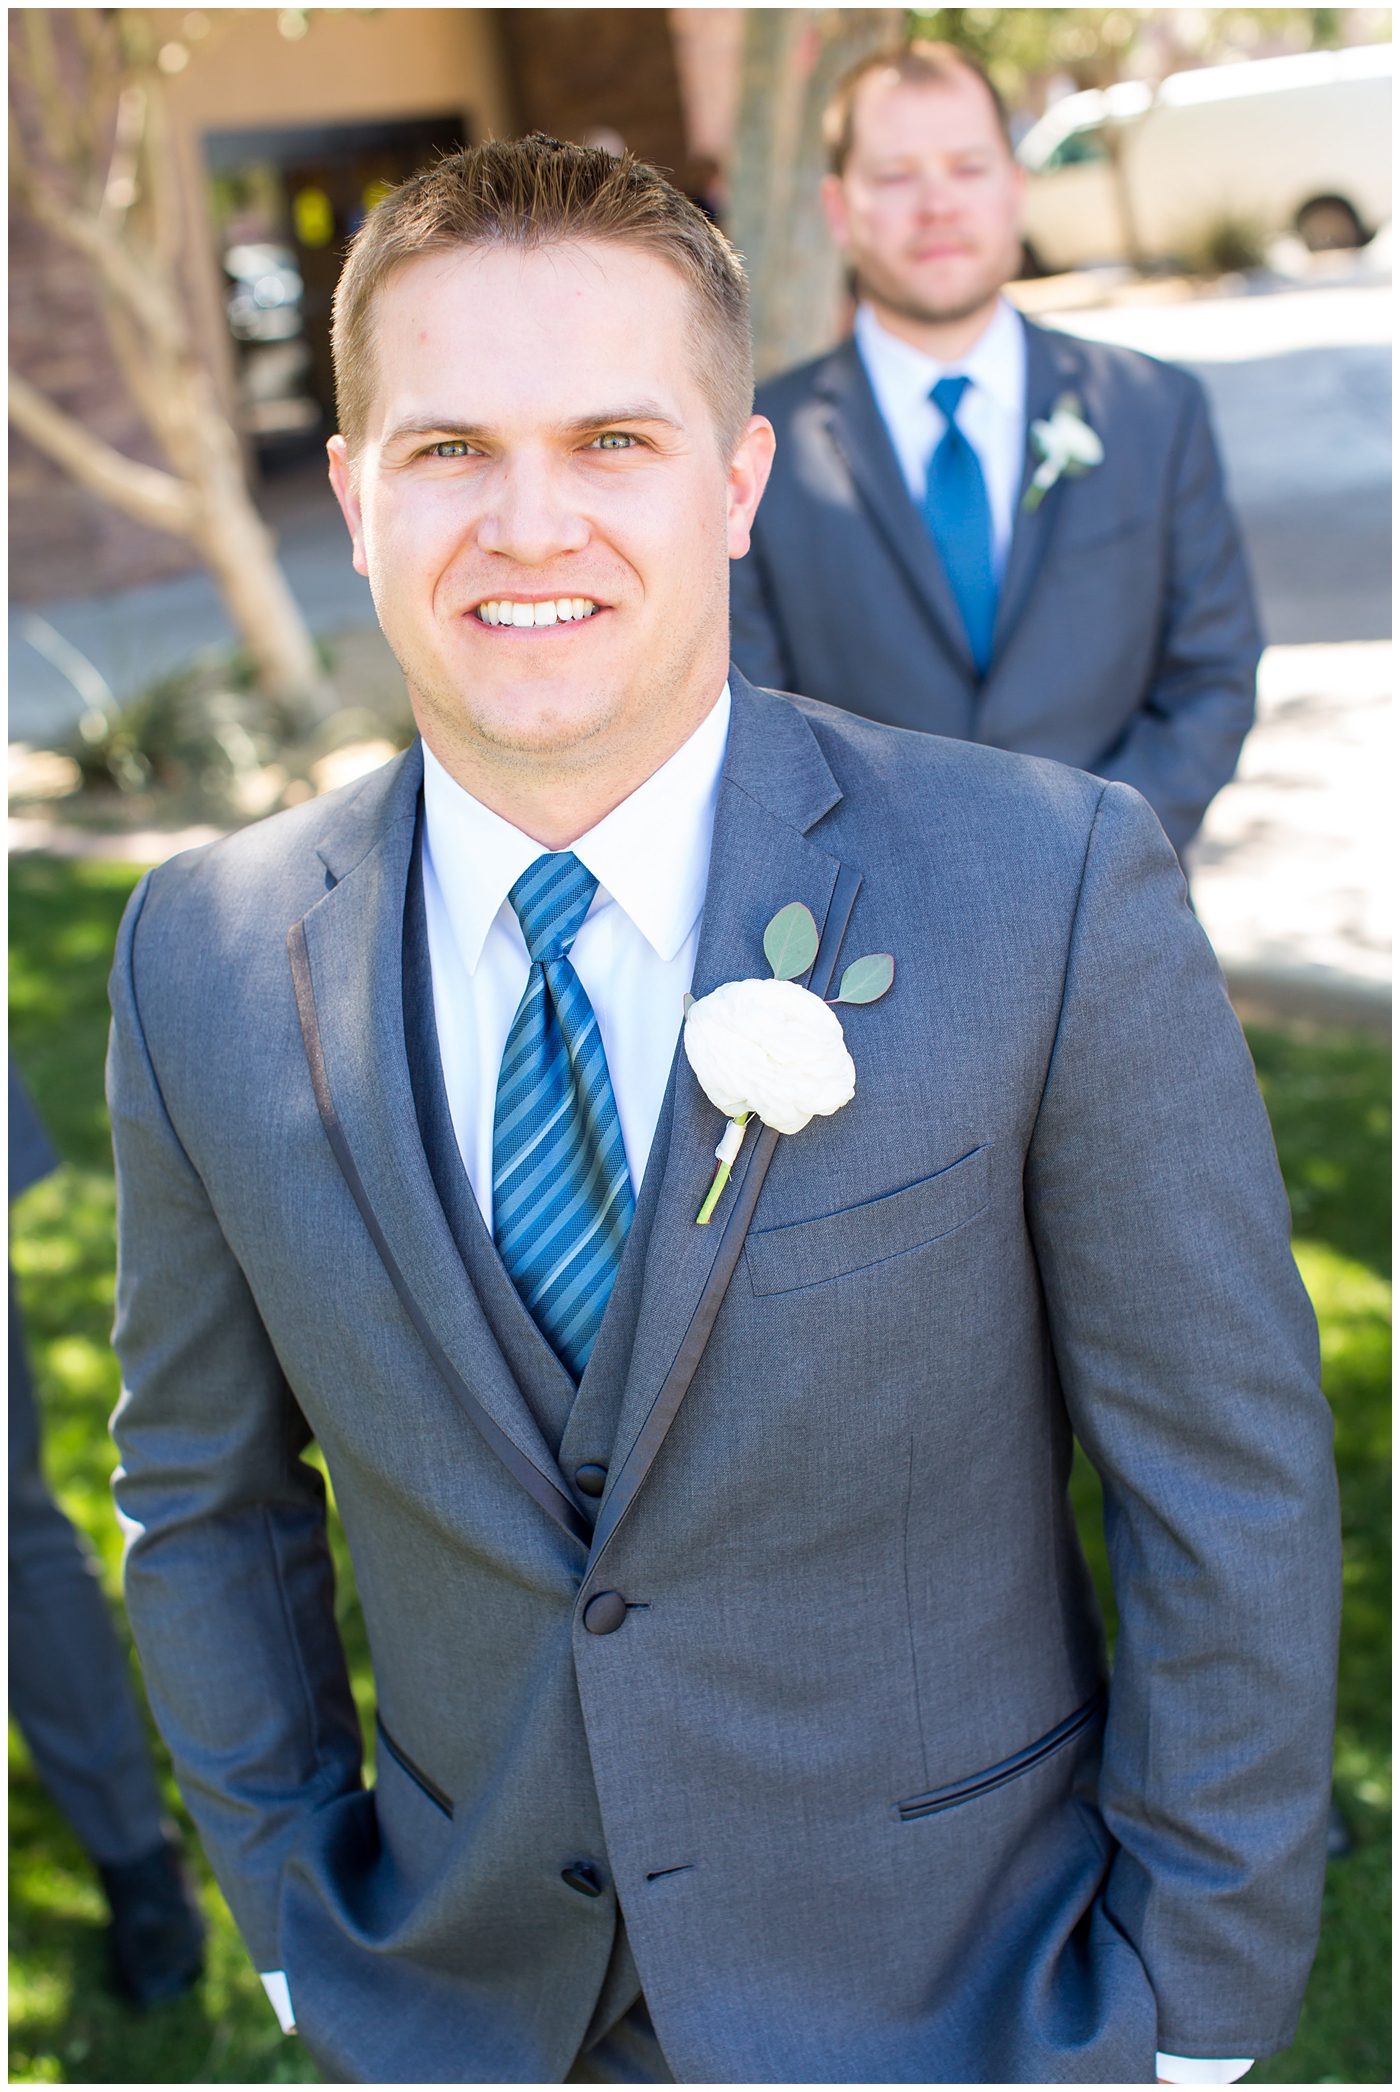 groom in light gray suit with blue tie and white rose boutonniere with groomsmen in gray suits with ties wedding day bridal party 